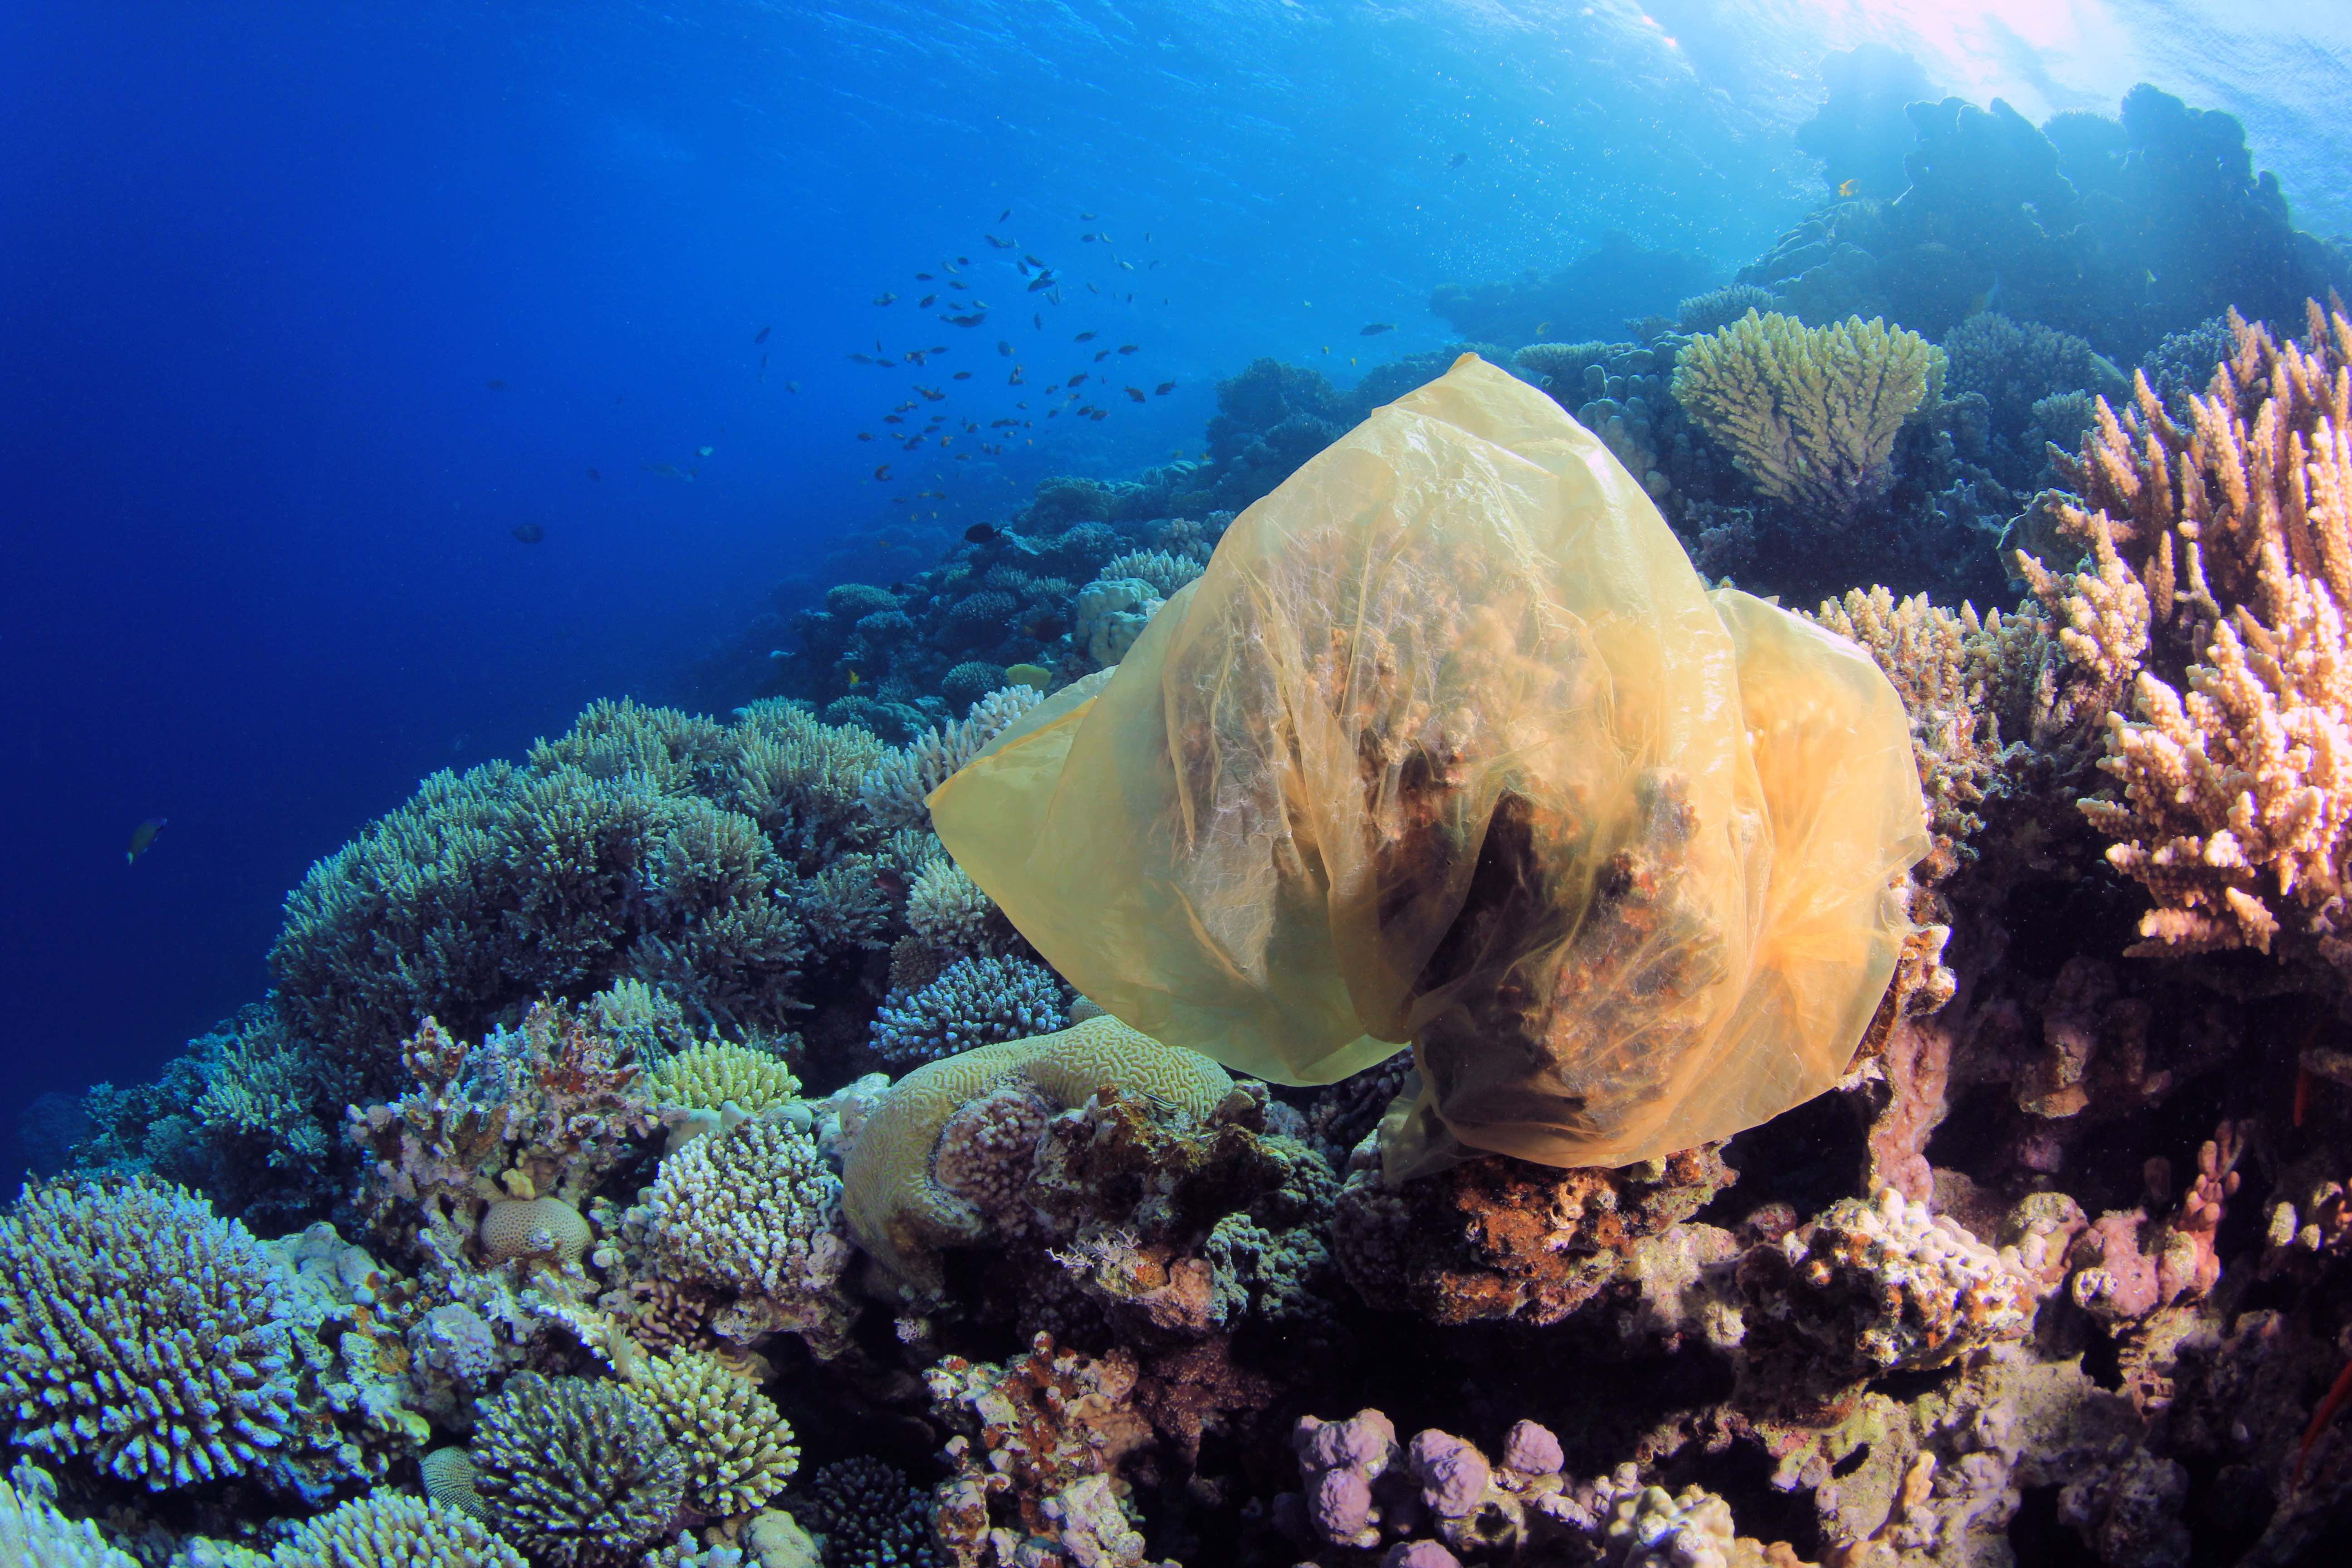 https://news.uci.edu/files/2019/03/Plastic-bag-suffocating-a-coral_shutterstock_75808879_Rich-Carey_Extended-license-agreement-Jan-2018-copy.jpg